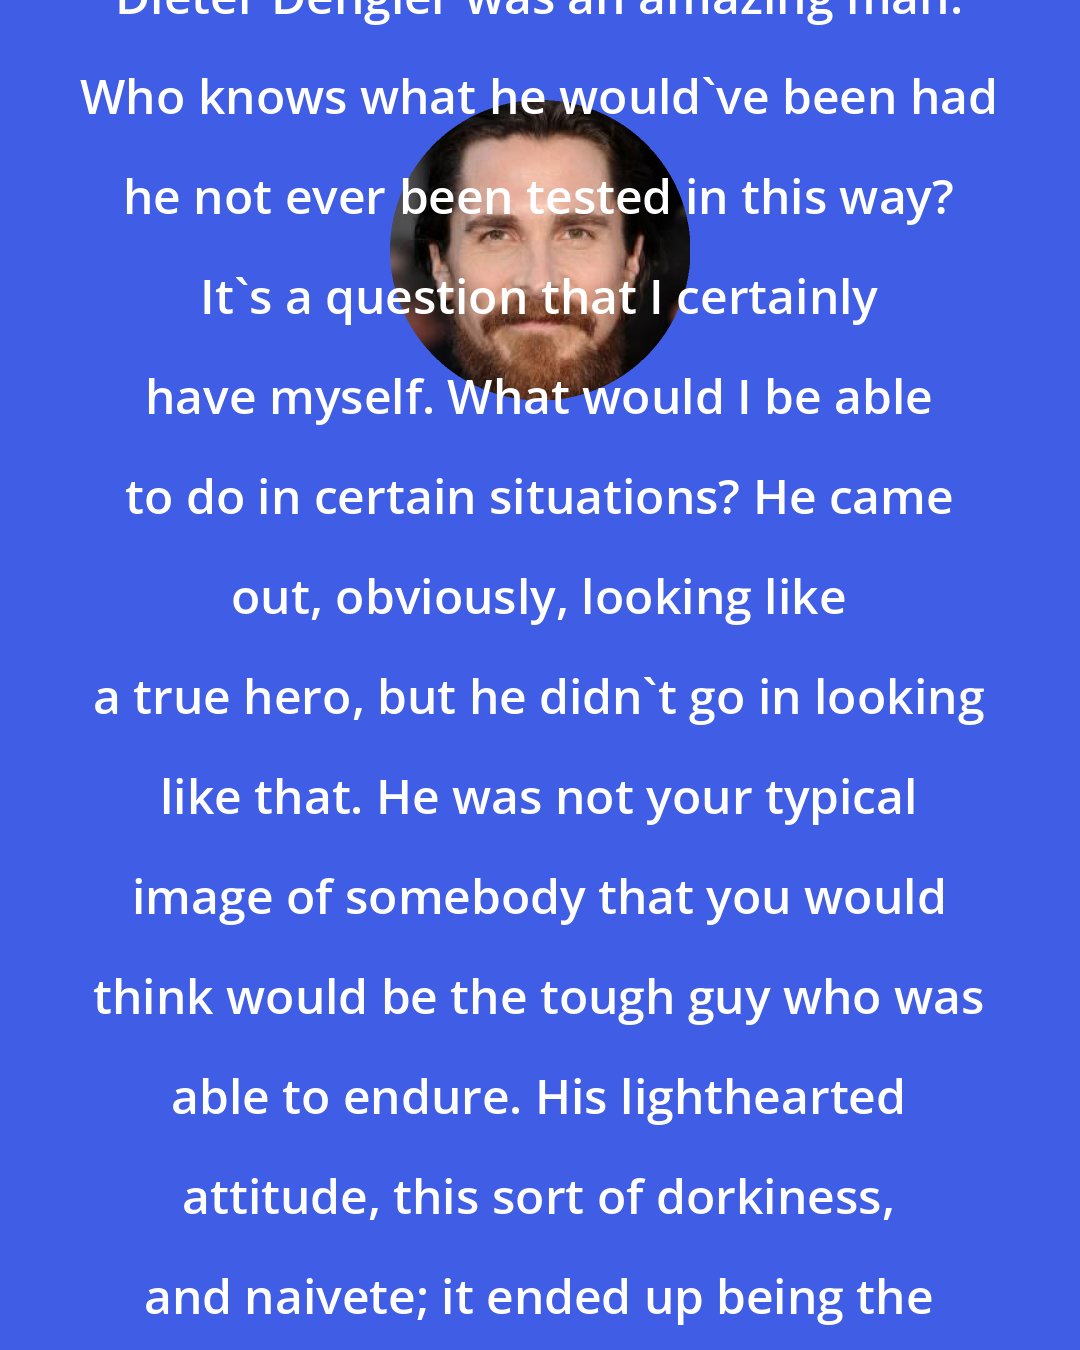 Christian Bale: Dieter Dengler was an amazing man. Who knows what he would've been had he not ever been tested in this way? It's a question that I certainly have myself. What would I be able to do in certain situations? He came out, obviously, looking like a true hero, but he didn't go in looking like that. He was not your typical image of somebody that you would think would be the tough guy who was able to endure. His lighthearted attitude, this sort of dorkiness, and naivete; it ended up being the finest tool for his survival.